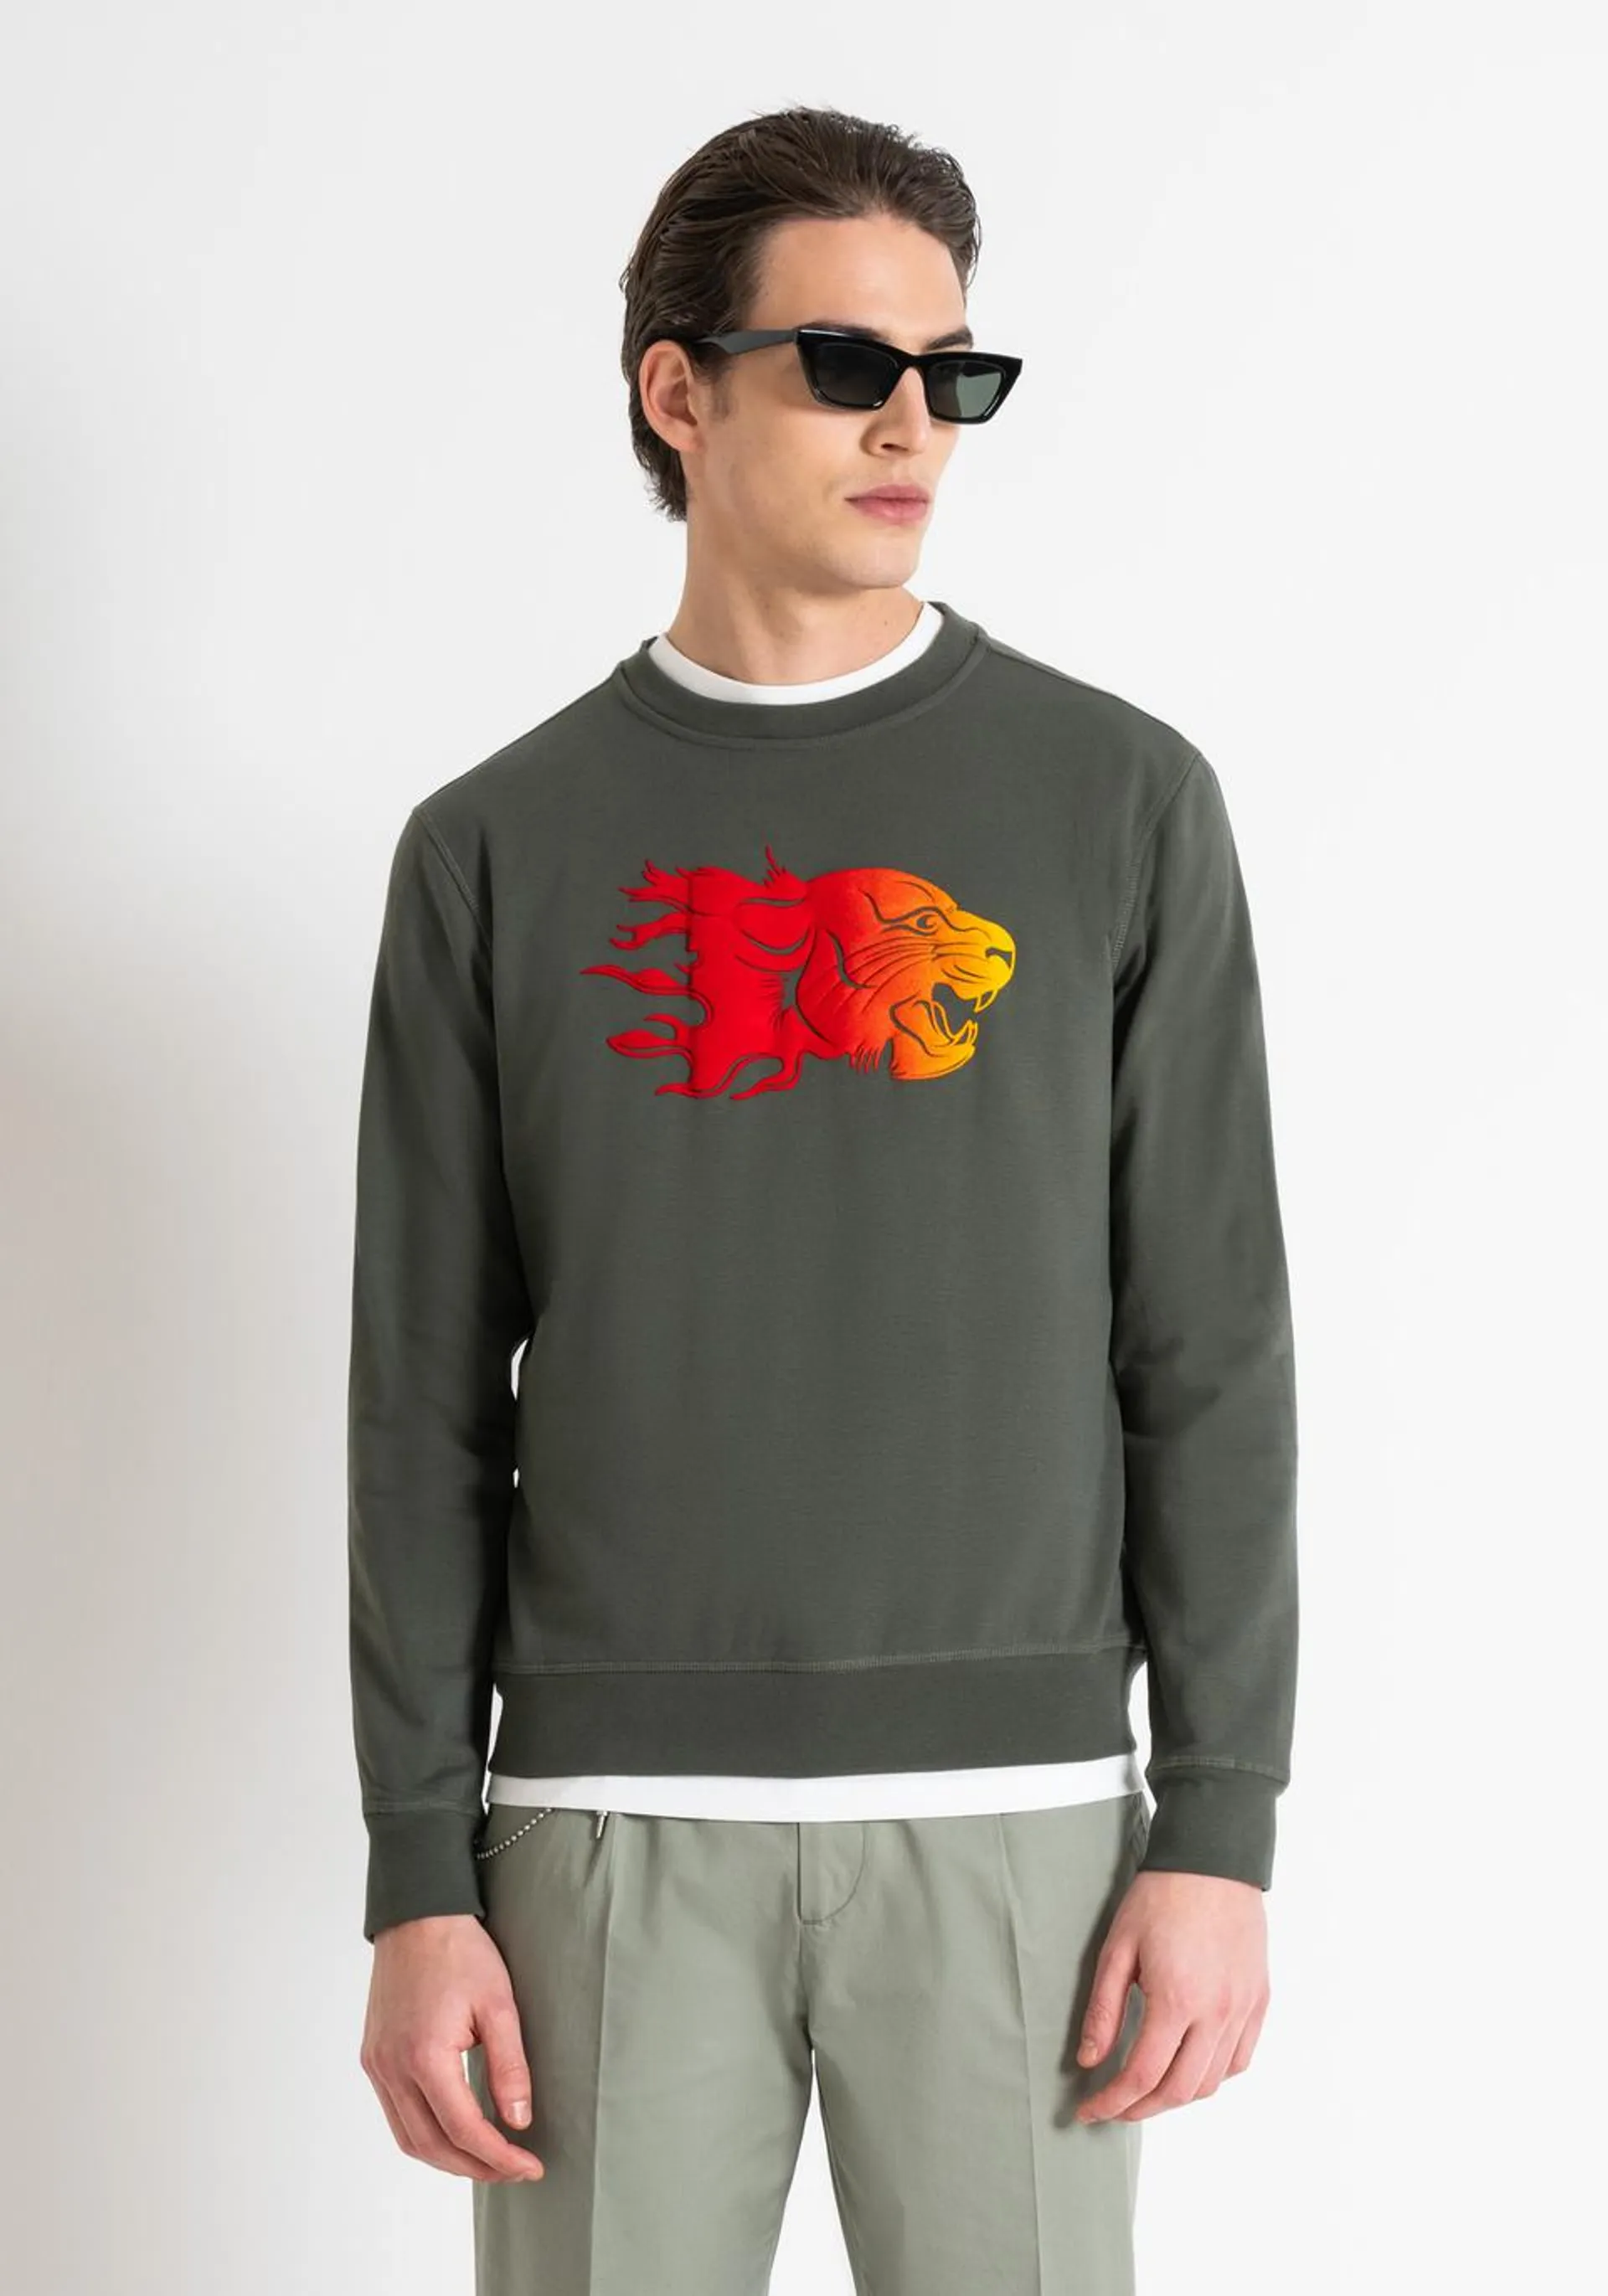 REGULAR FIT SWEATSHIRT IN SUSTAINABLE COTTON-POLYESTER BLEND WITH FADED FLOCK PRINT